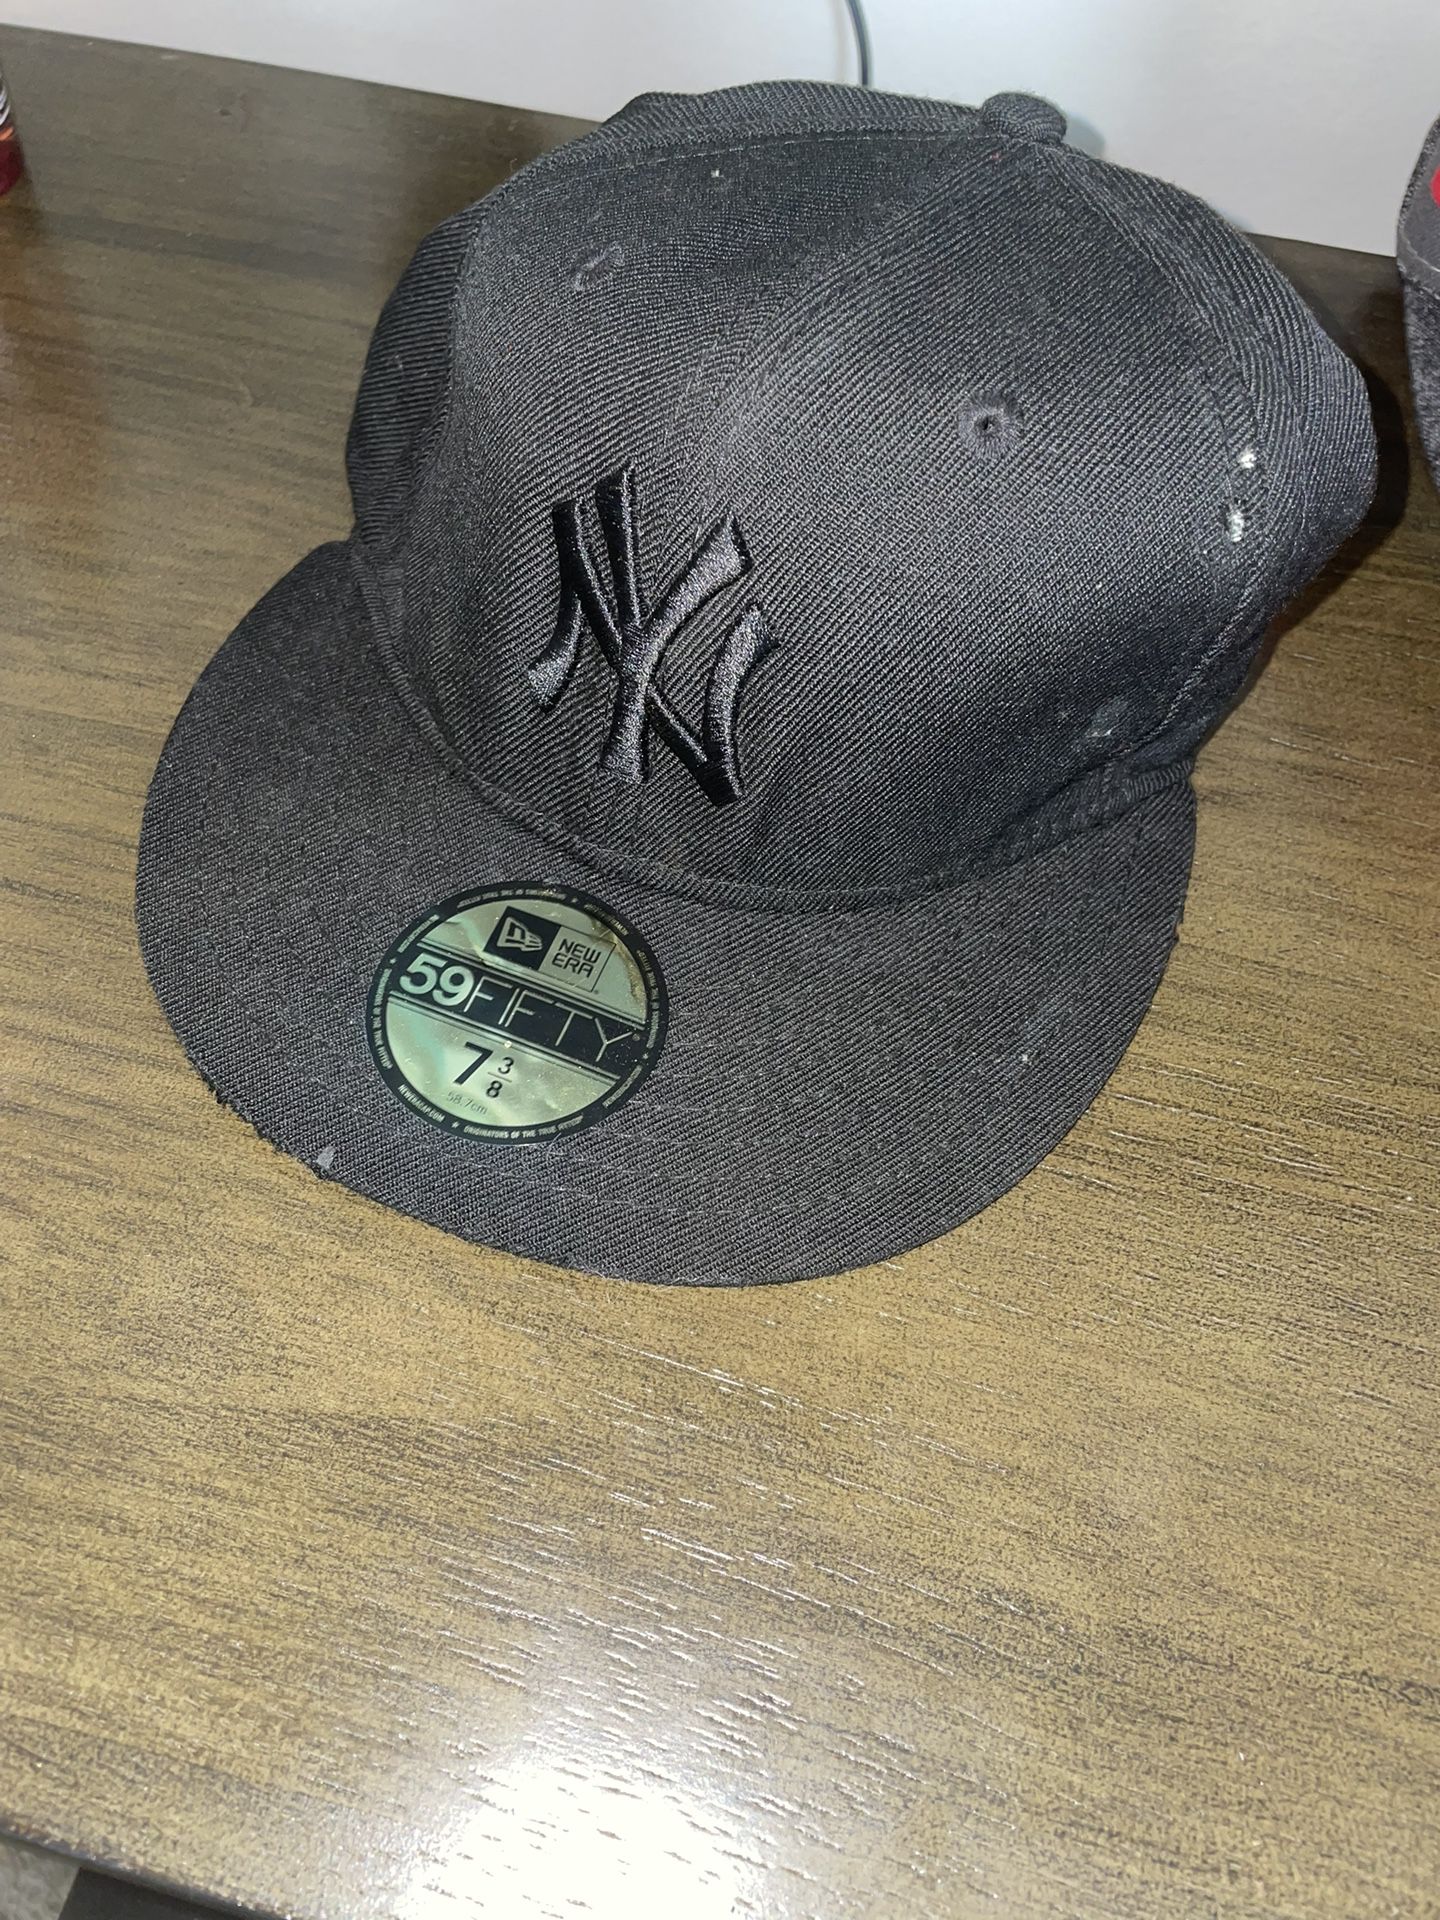  Yankees Fitted Hat Size 7 3/8